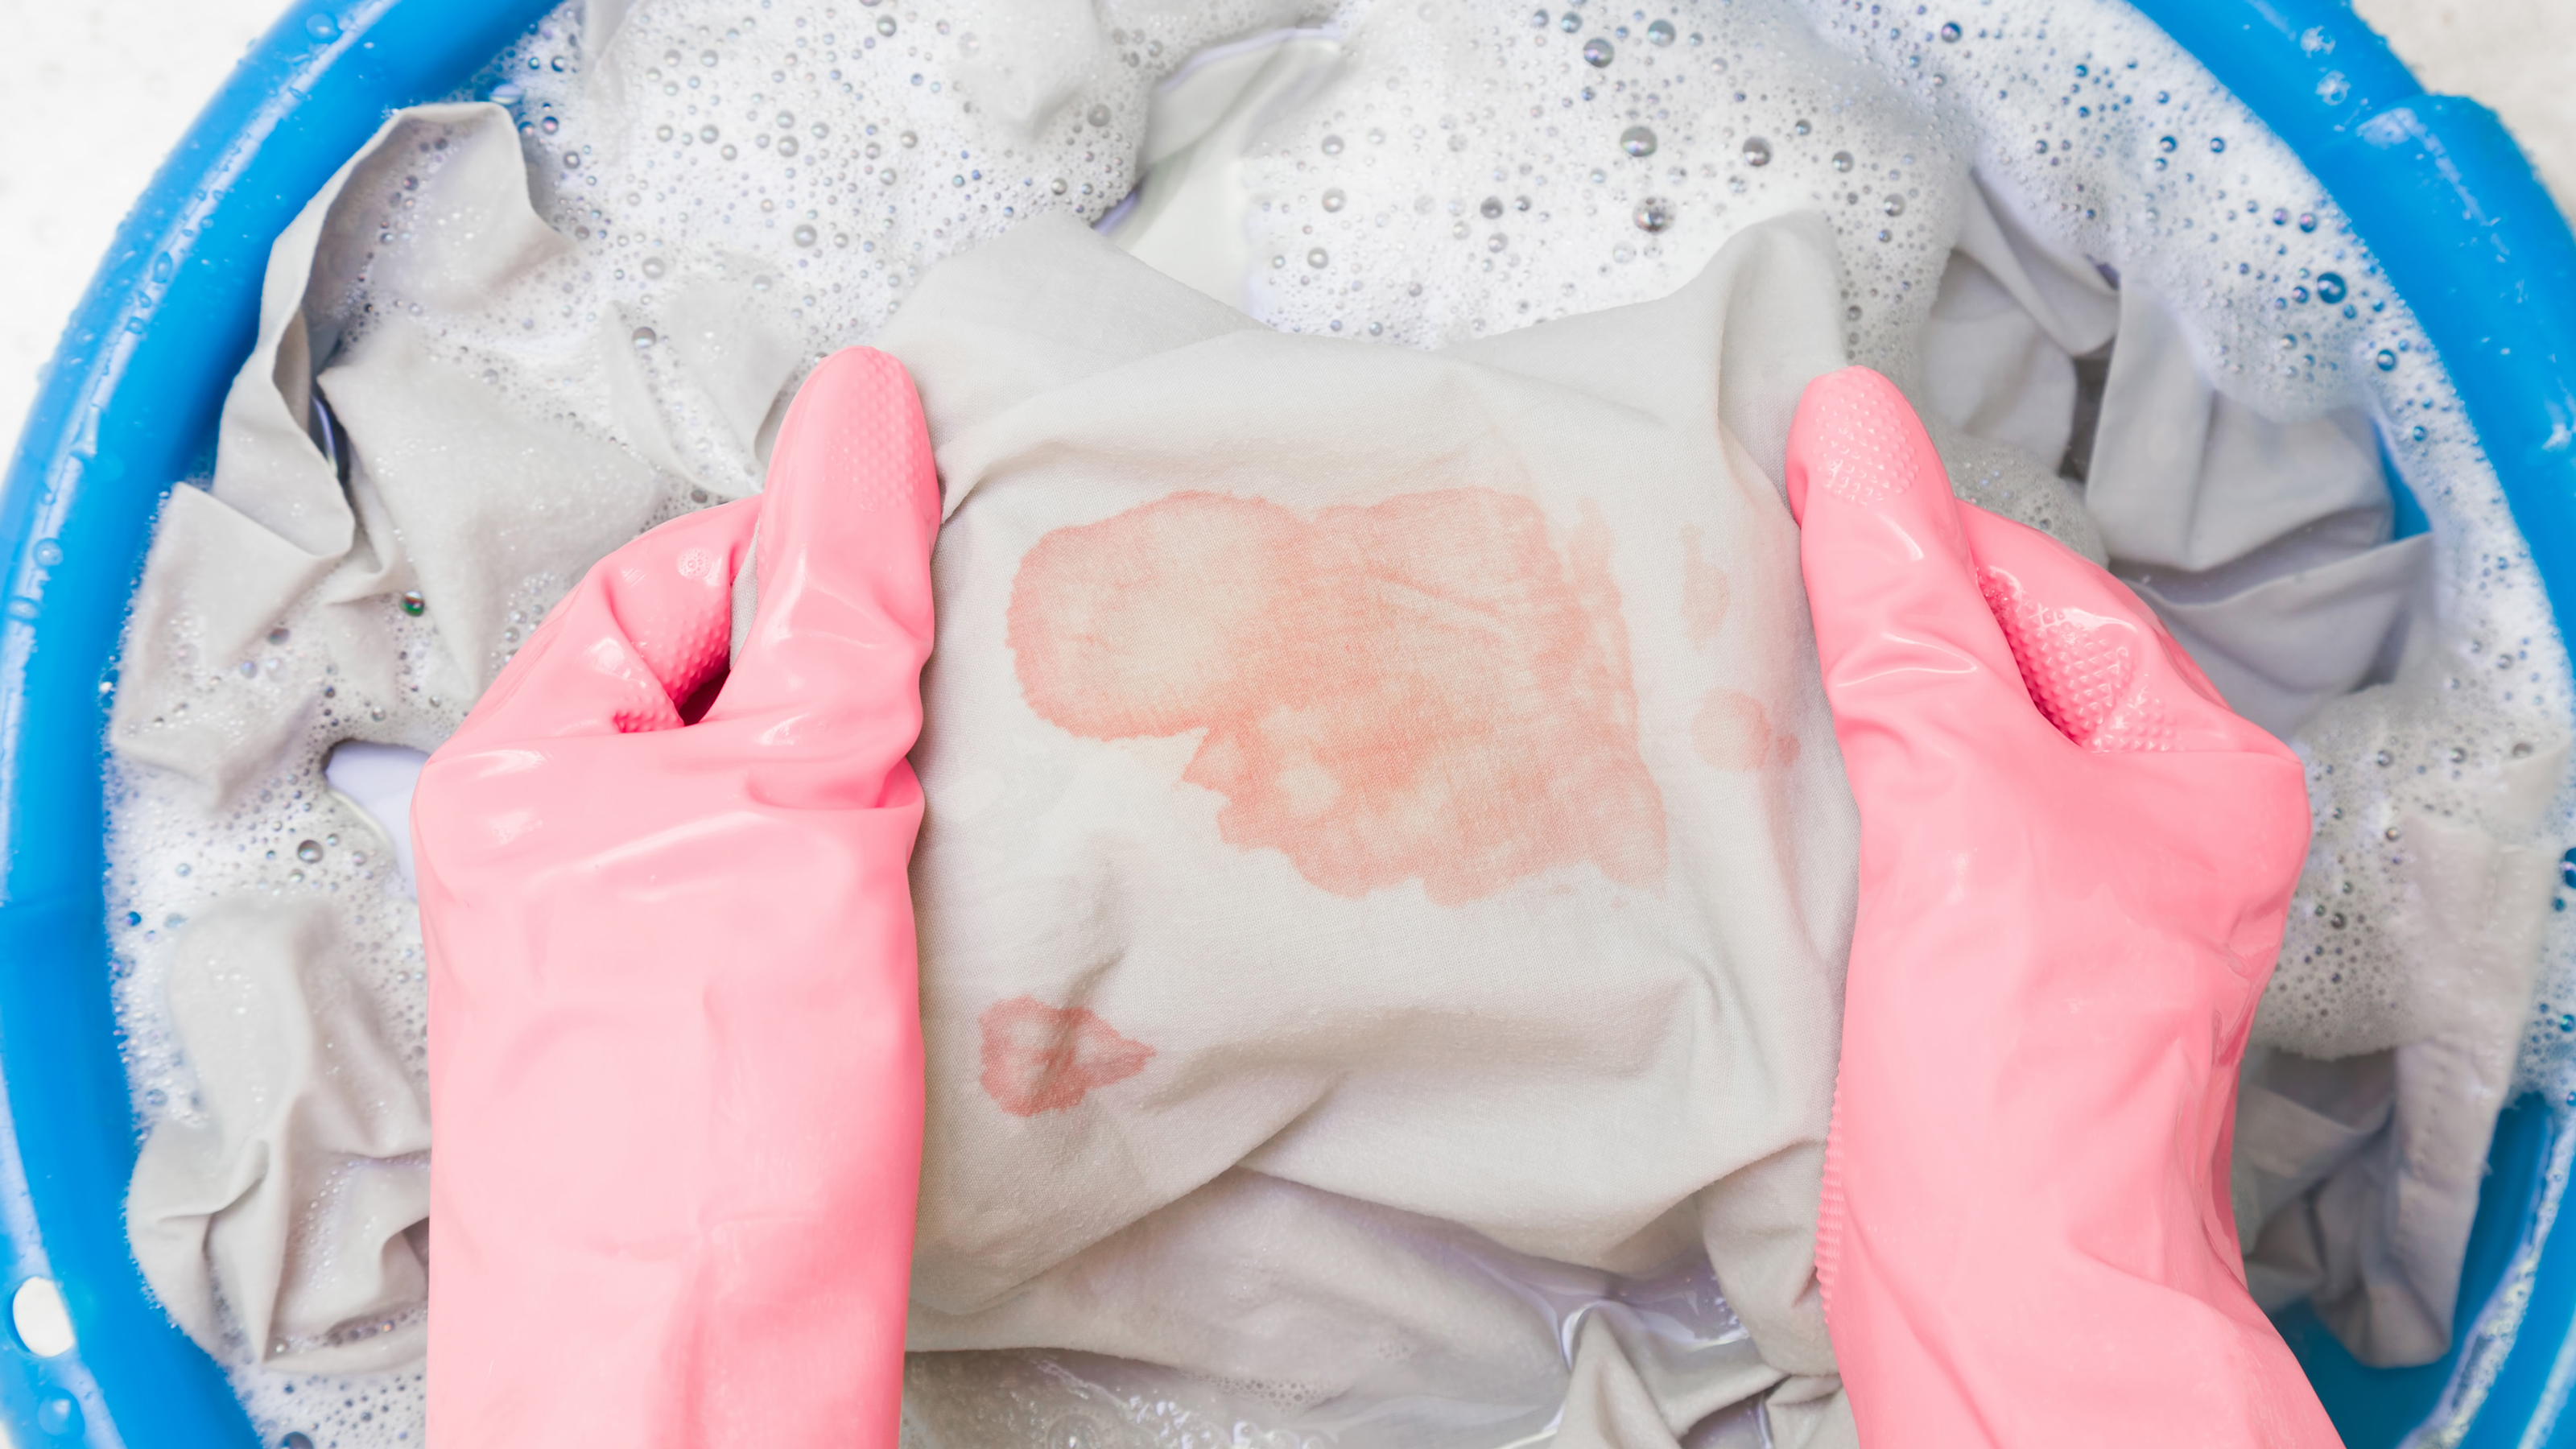 How To Remove Period Stains - Blood Stain Removal Tips